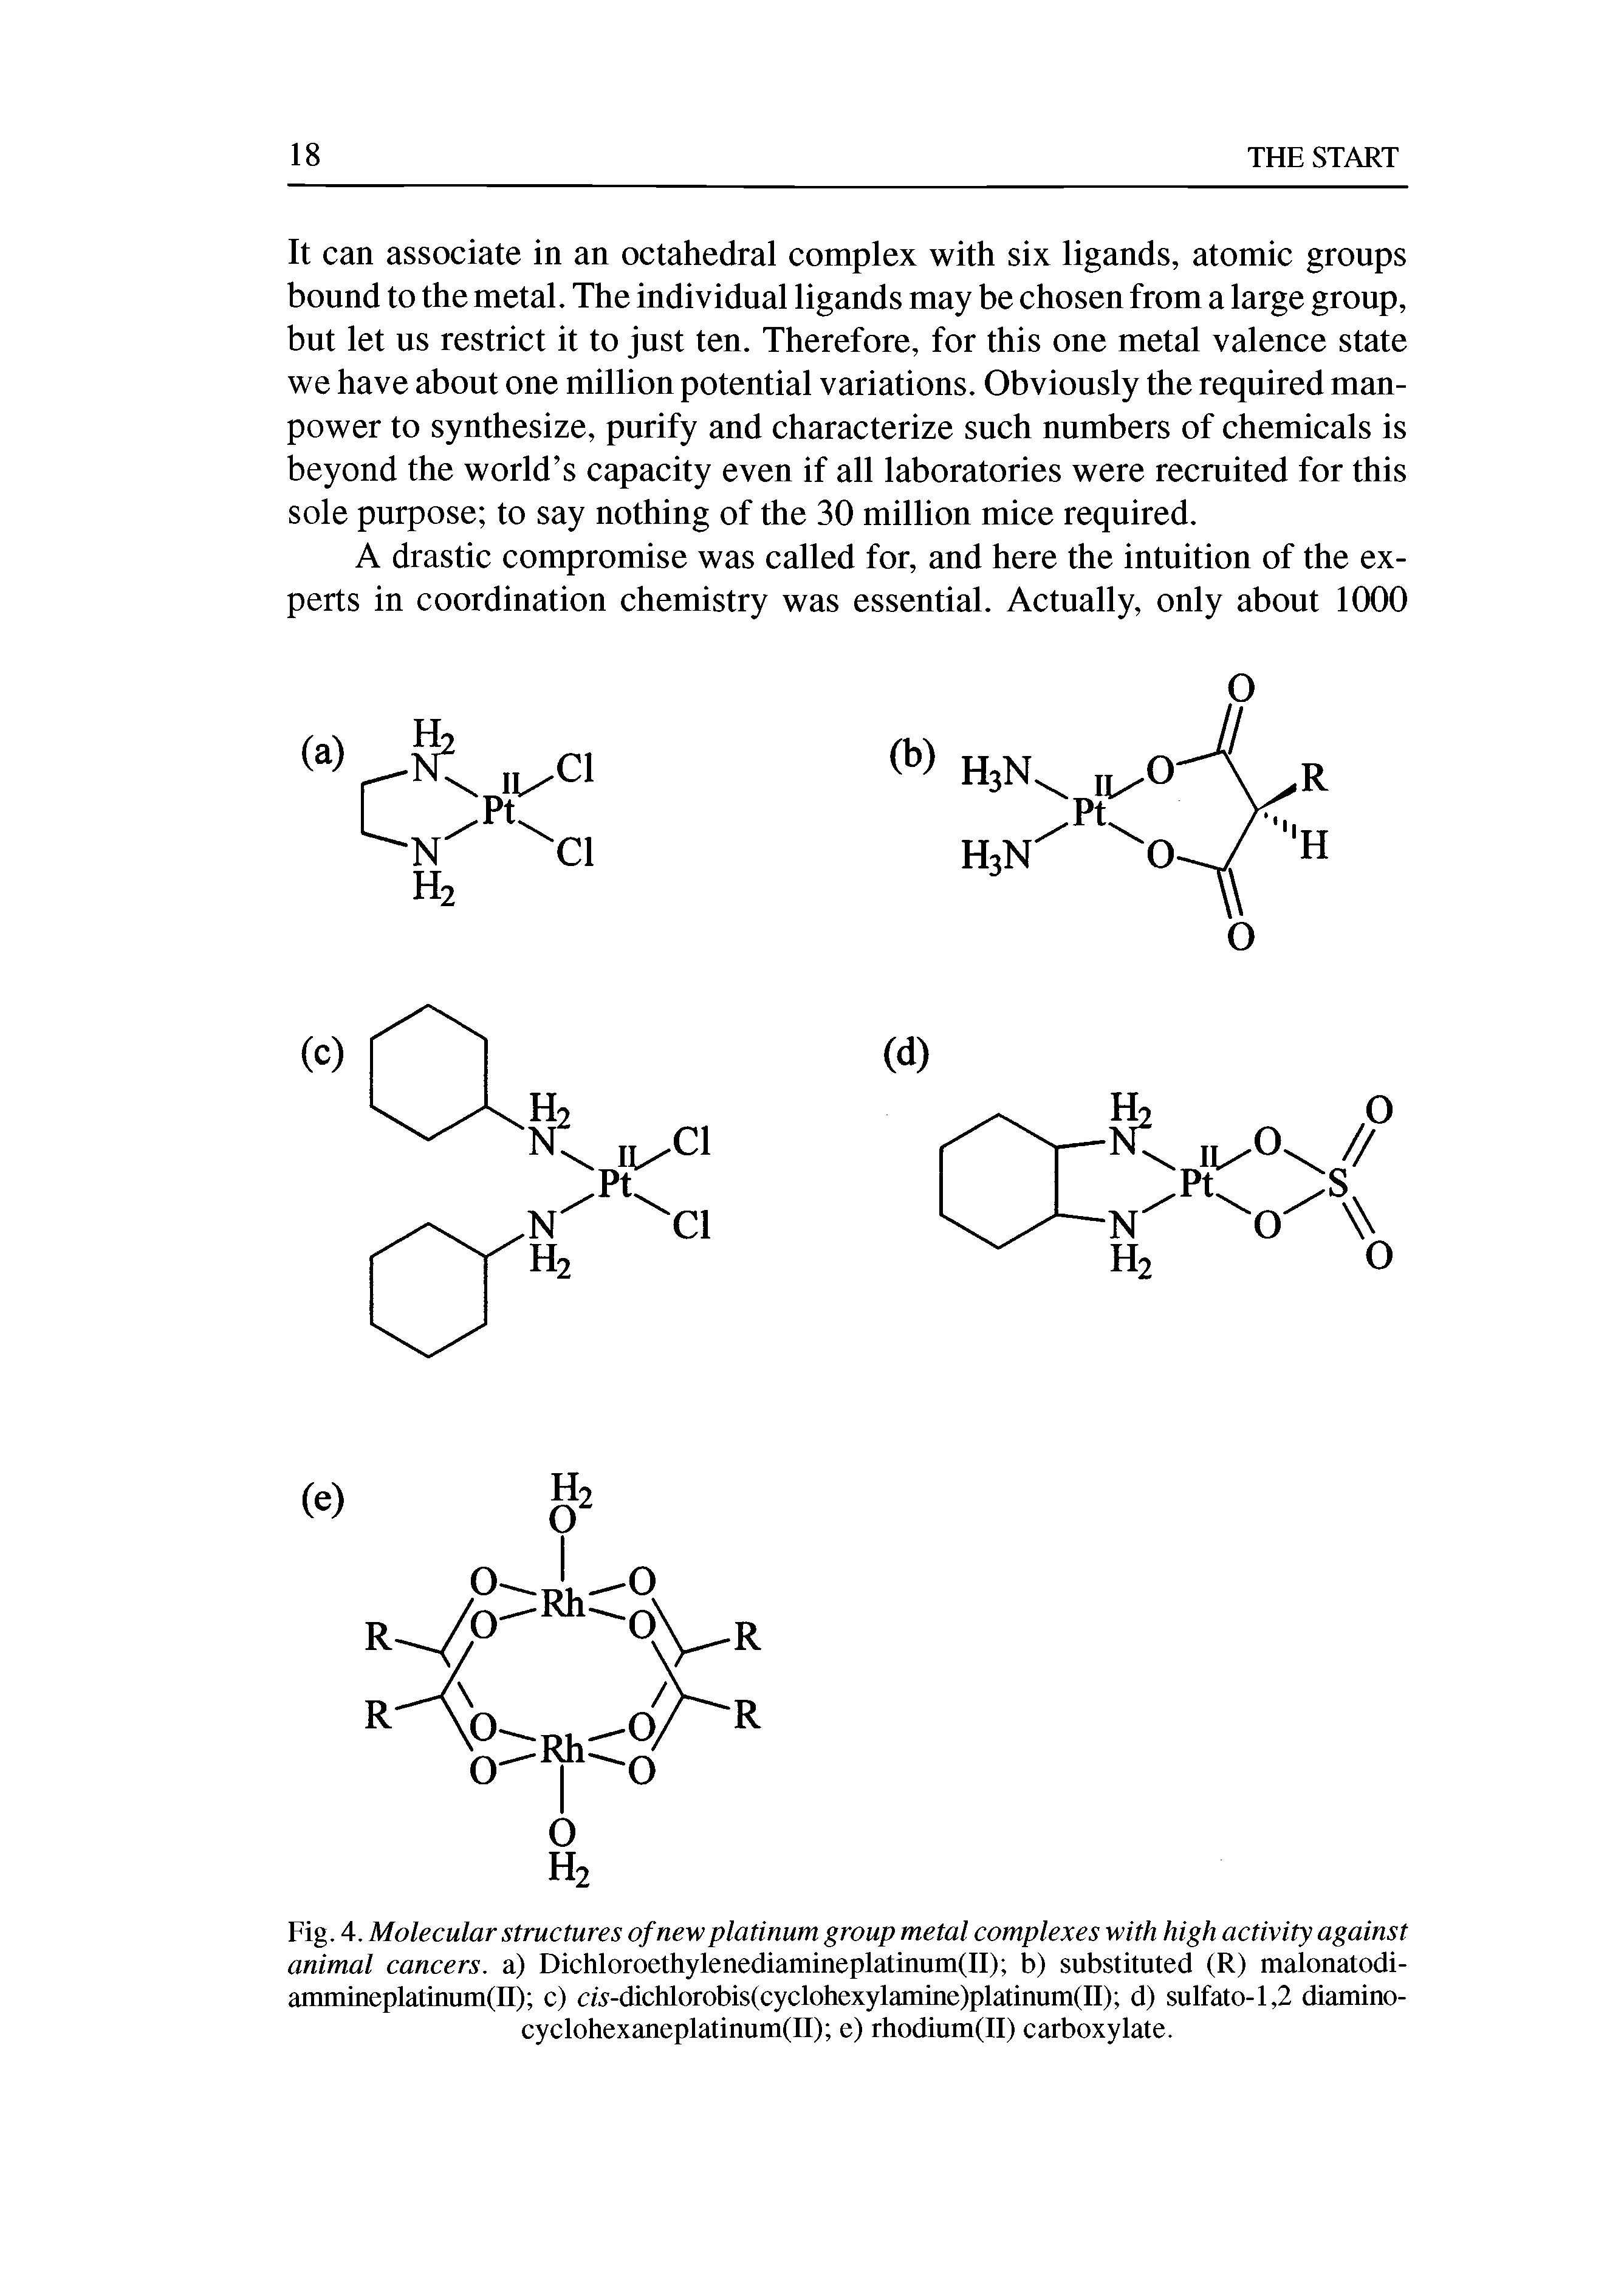 Fig. 4. Molecular structures of new platinum group metal complexes with high activity against animal cancers, a) Dichloroethylenediamineplatinum(II) b) substituted (R) malonatodi-ammineplatinum(II) c) d.s-dichlorobis(cyclohcxylarninc)platinum(II) d) sulfato-1,2 diamino-cyclohexaneplatinum(II) e) rhodium(II) carboxylate.